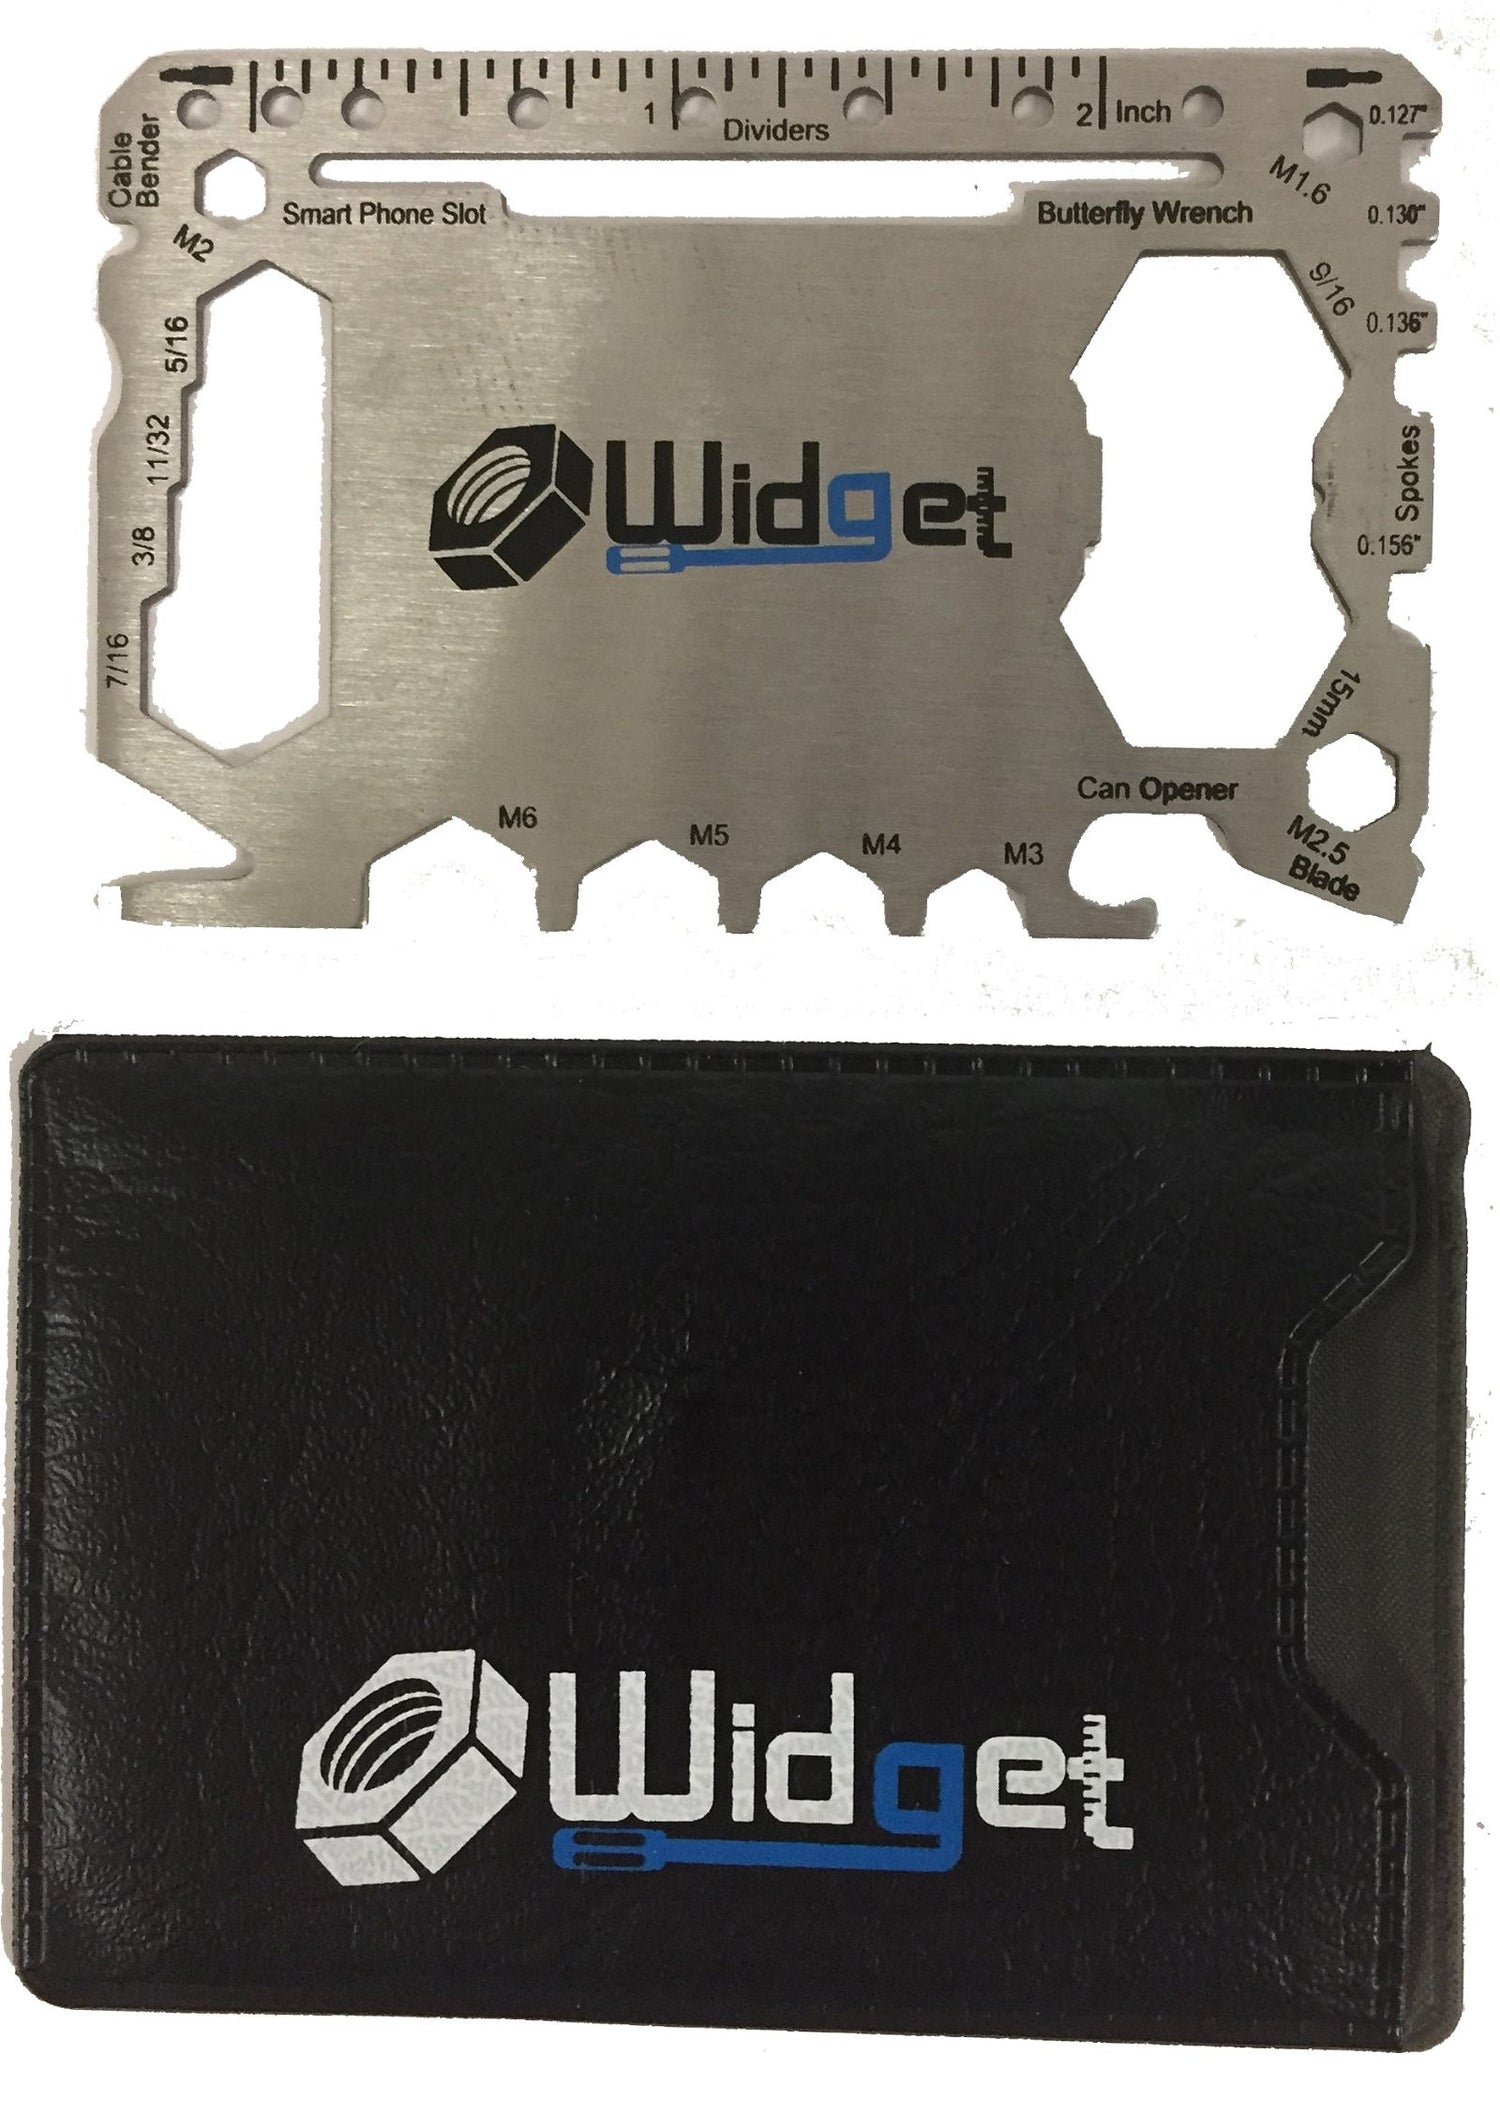 The WIDGET (43-in-1 Credit Card Size Multi-tool) - W4W Products 